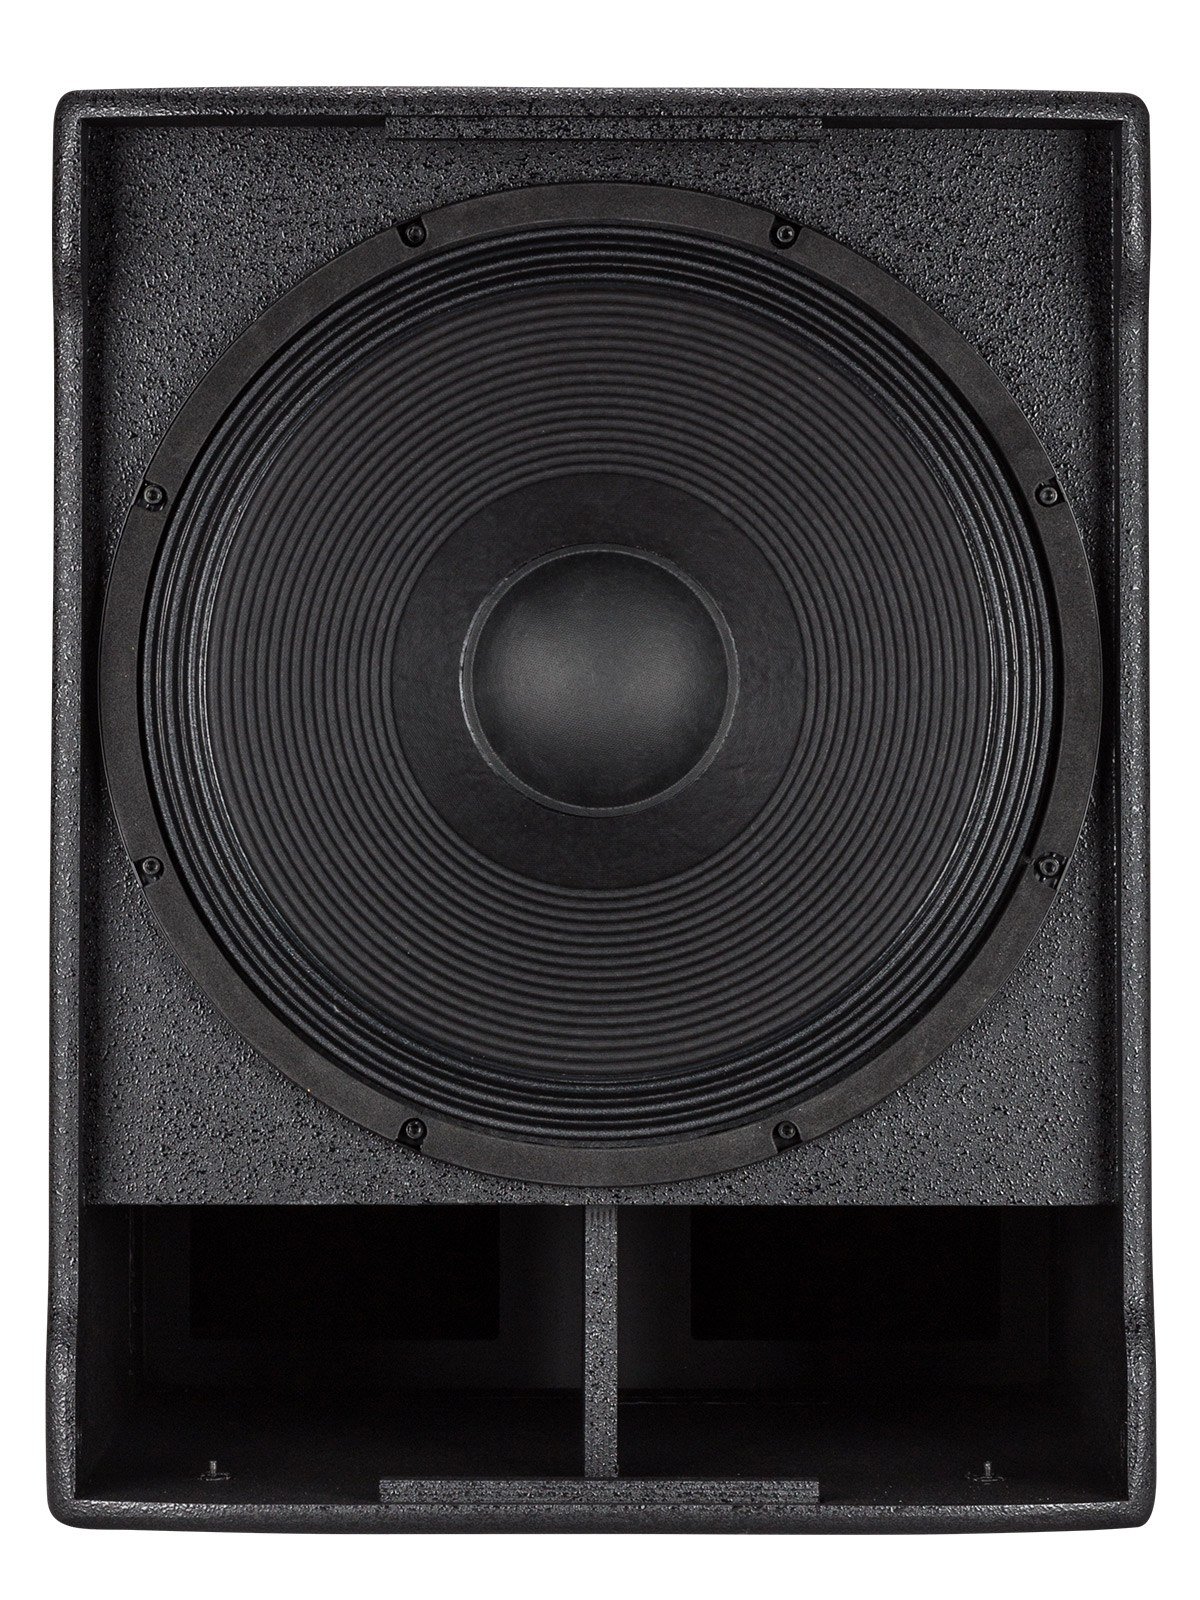 RCF SUB 708-AS Active Subwoofer